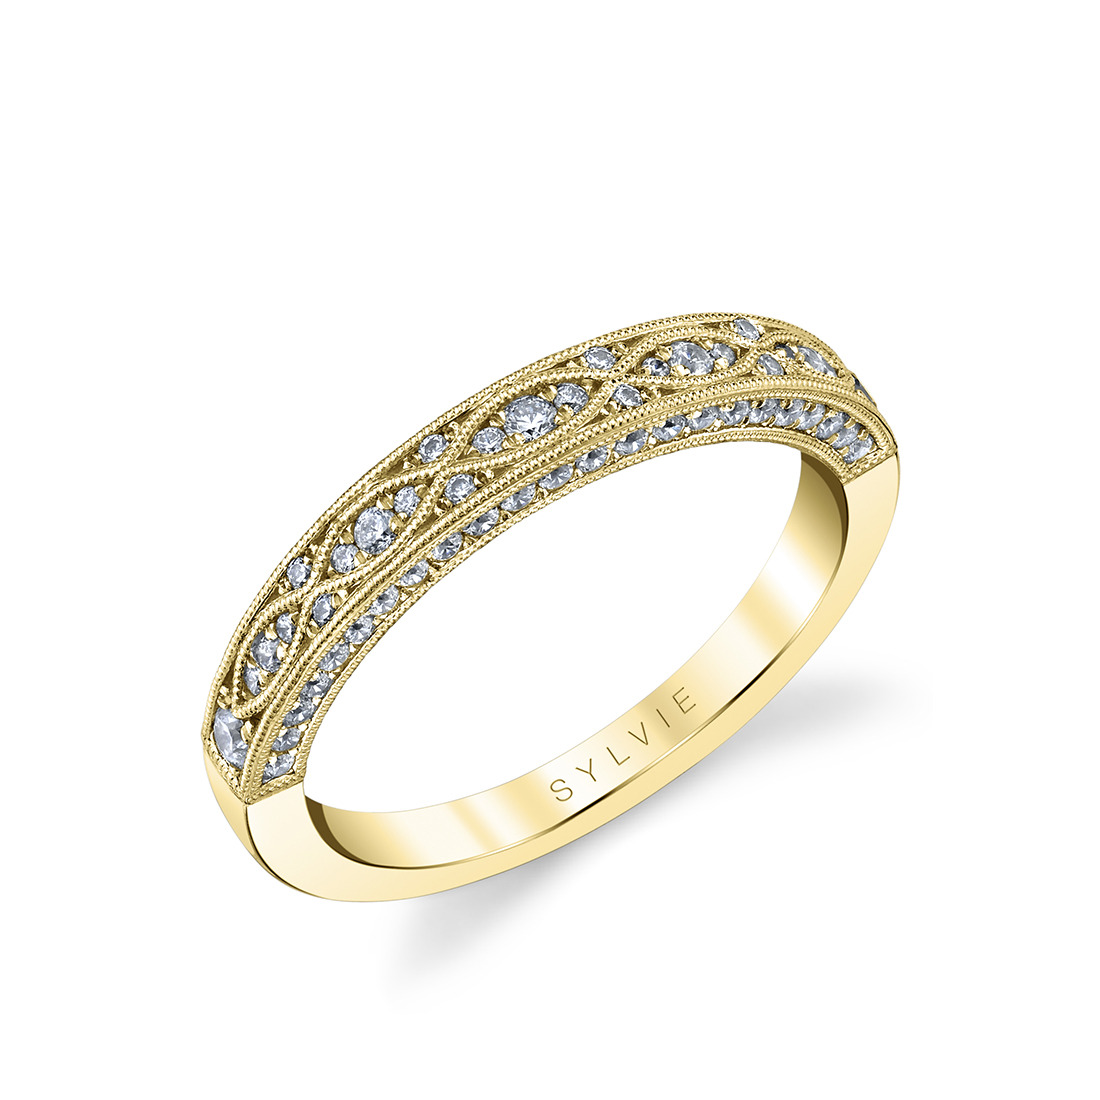 vintage inspired wedding band in yellow gold